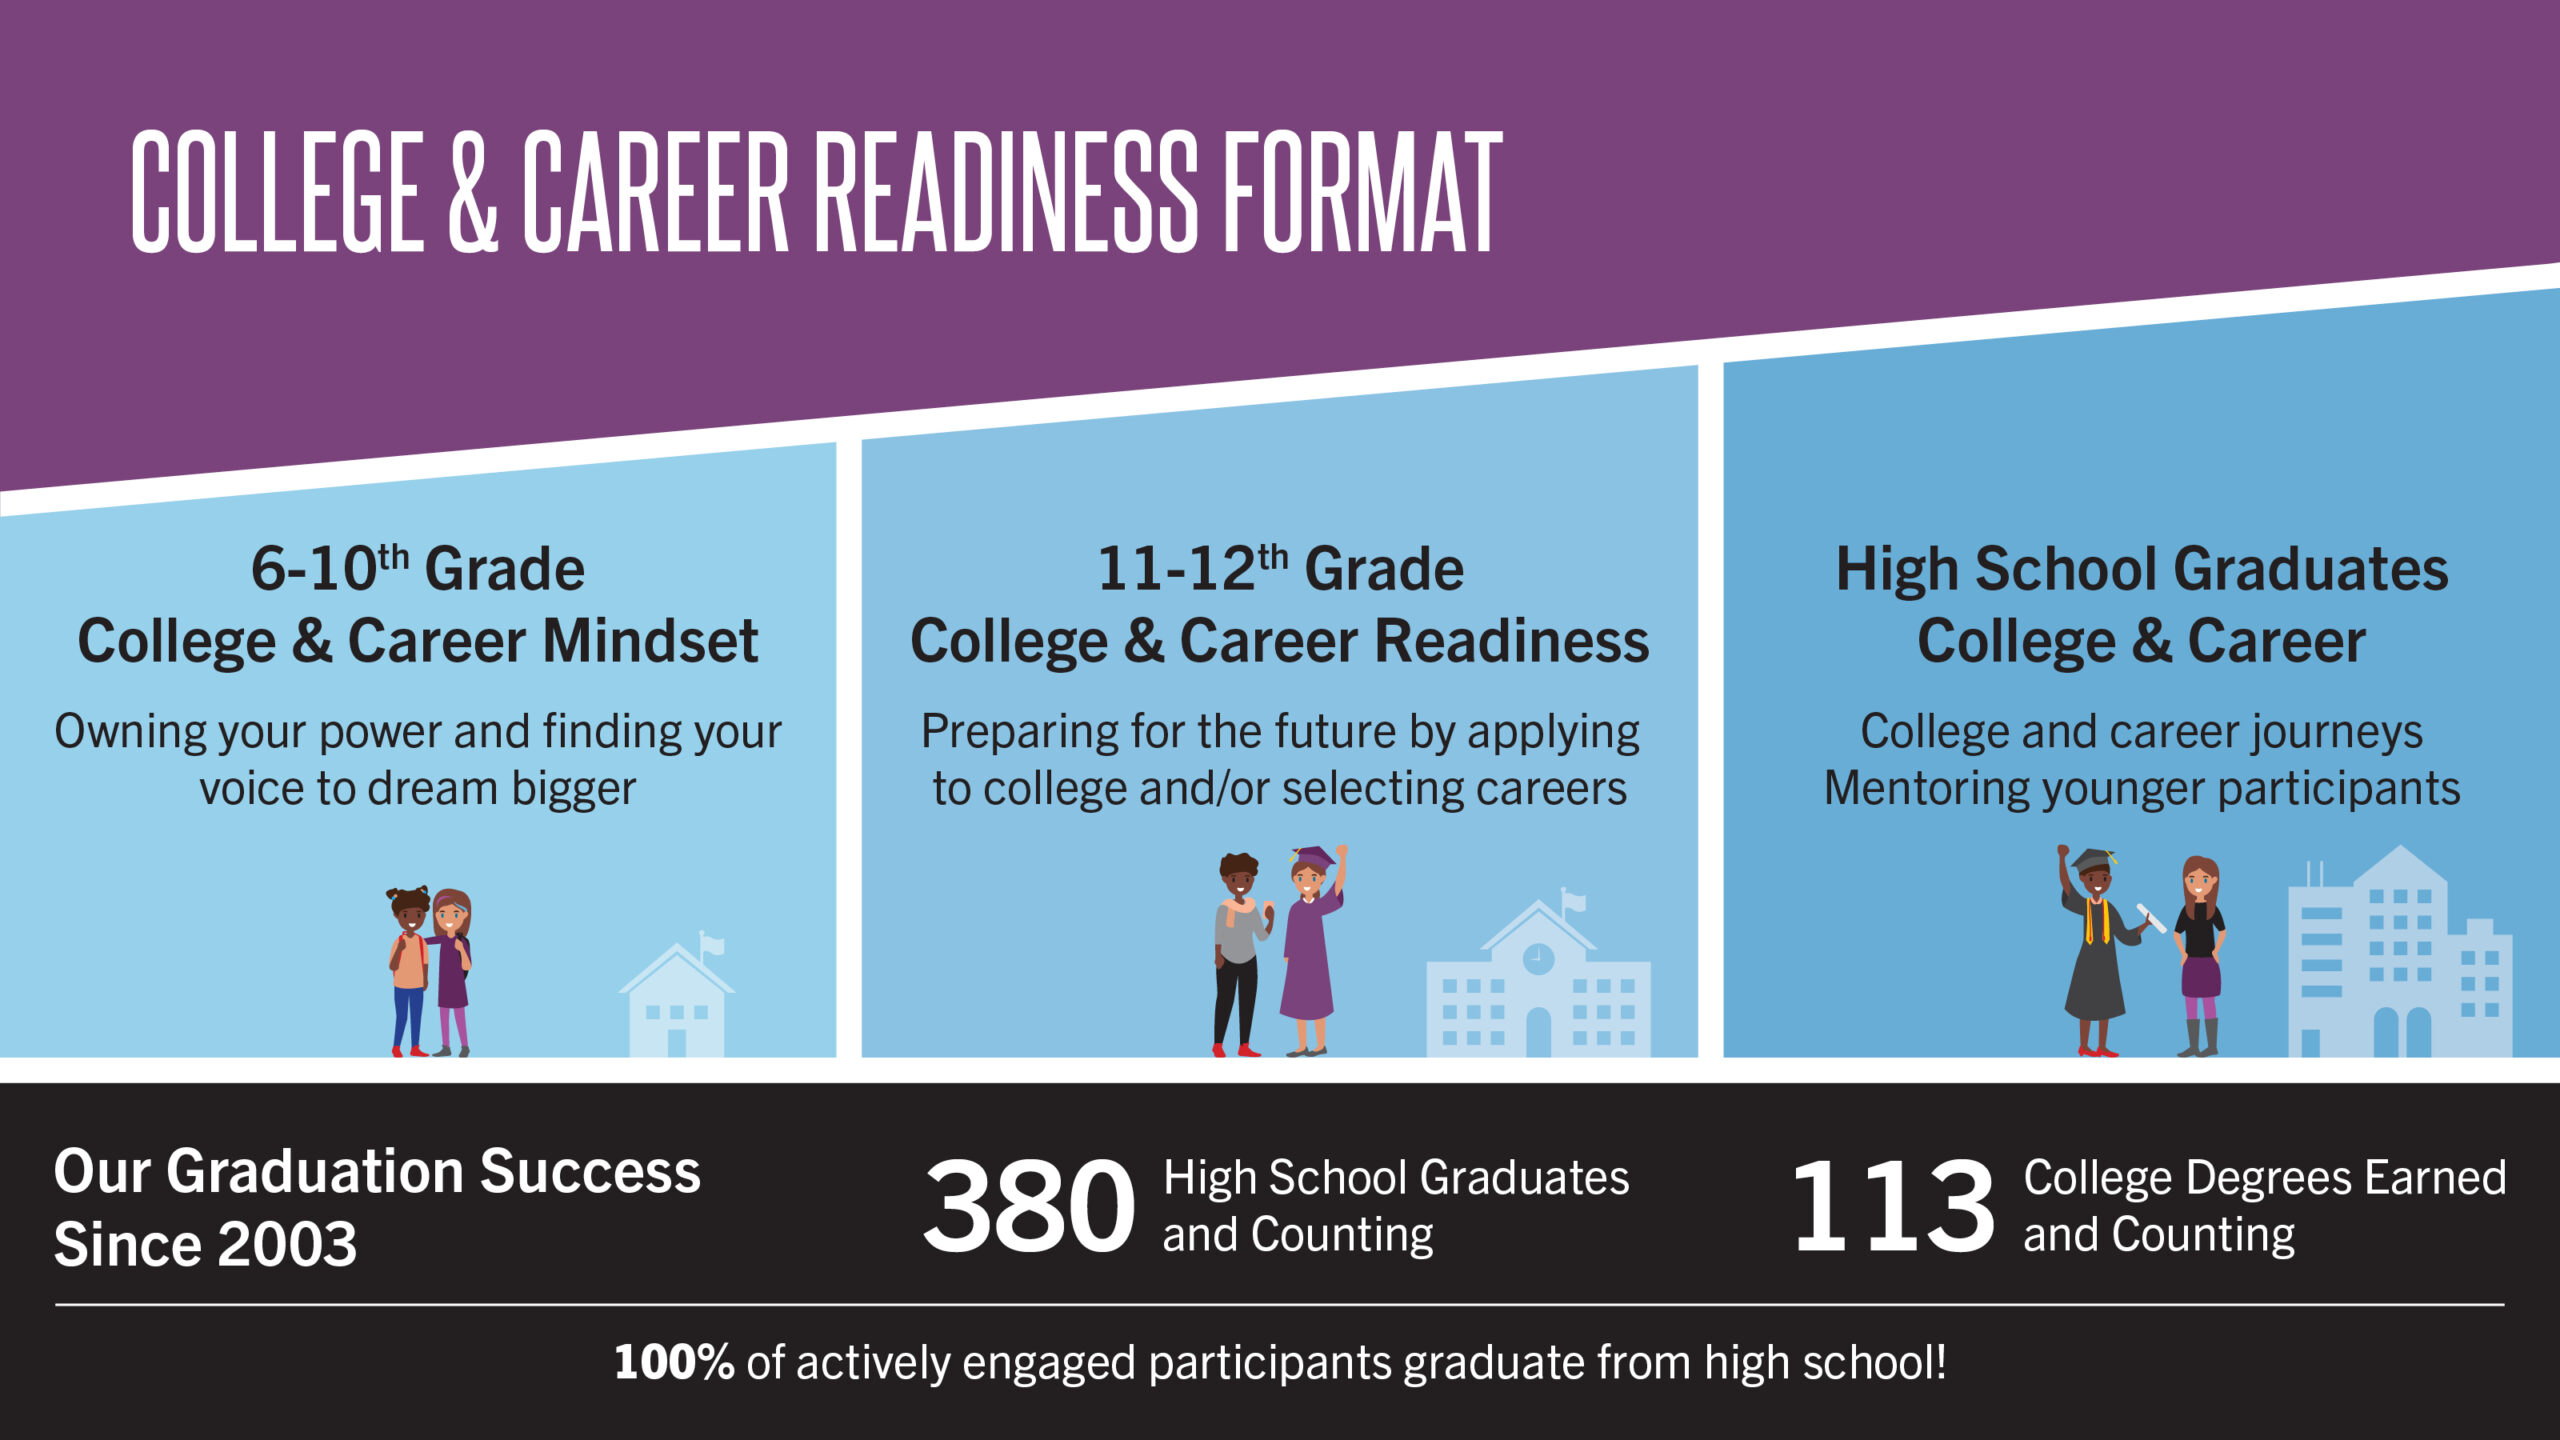 College and Career Readiness Format graphic with 6-10th Grade College & Career Mindset, 11-12th Grade College & Career Readiness, and High School Graduates College & Career. Our Graduation Success Since 2003 includes 380 High School Graduates and 113 College Degrees Earned (and counting!)